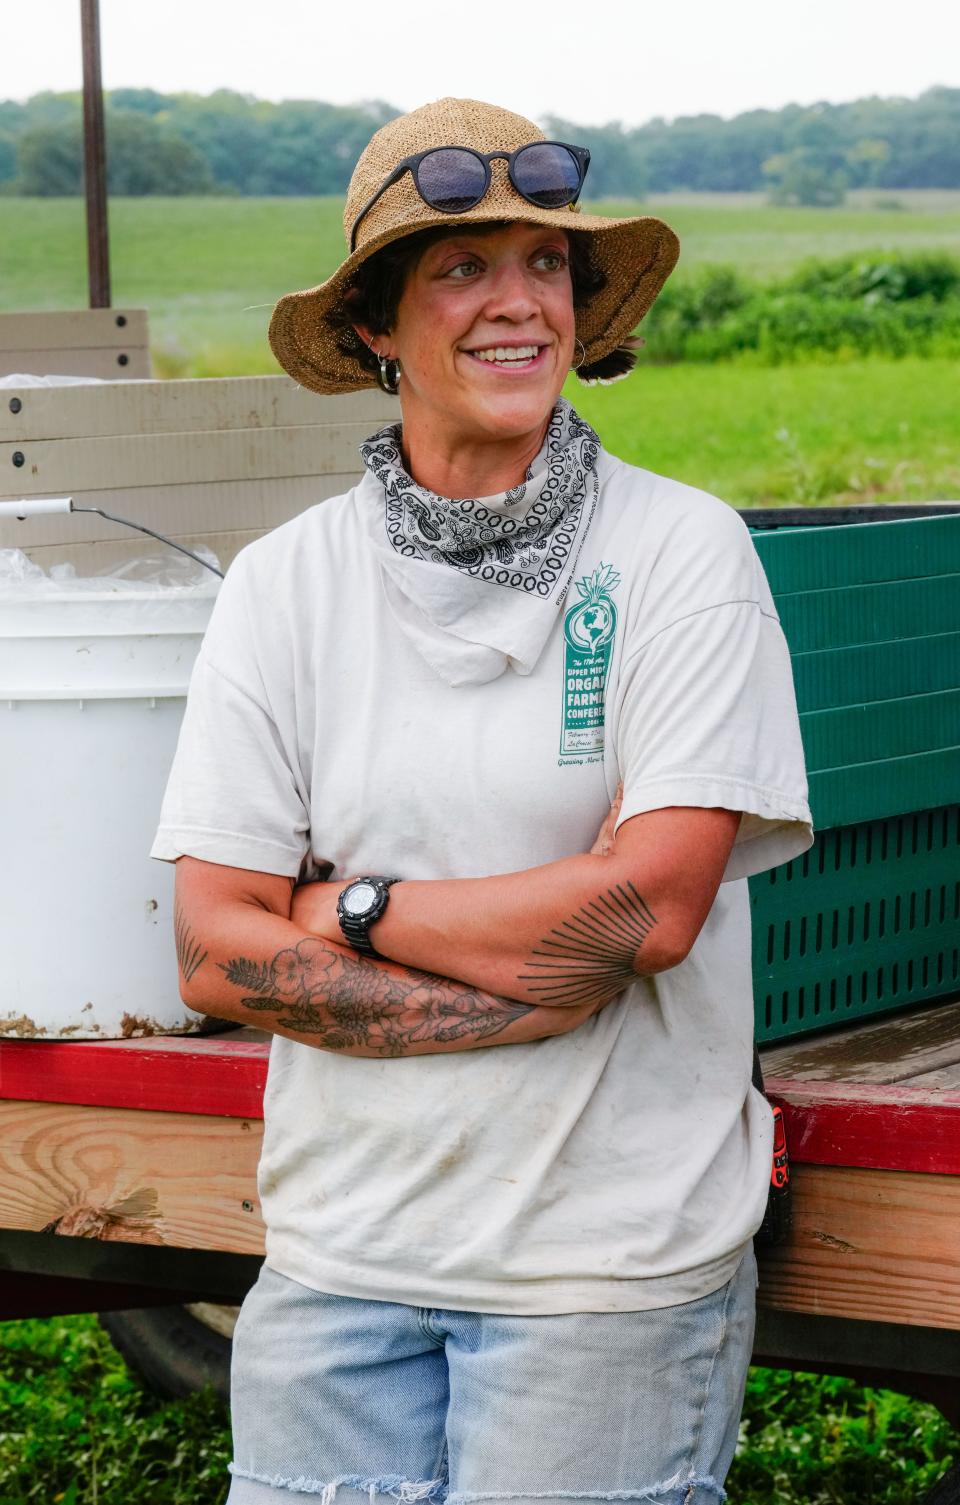 Organic farm apprentice Laura Seleski speaks about the valuable hands-on learning opportunities at Gwenyn Hill Farm in Waukesha on Tuesday, August 7, 2023.